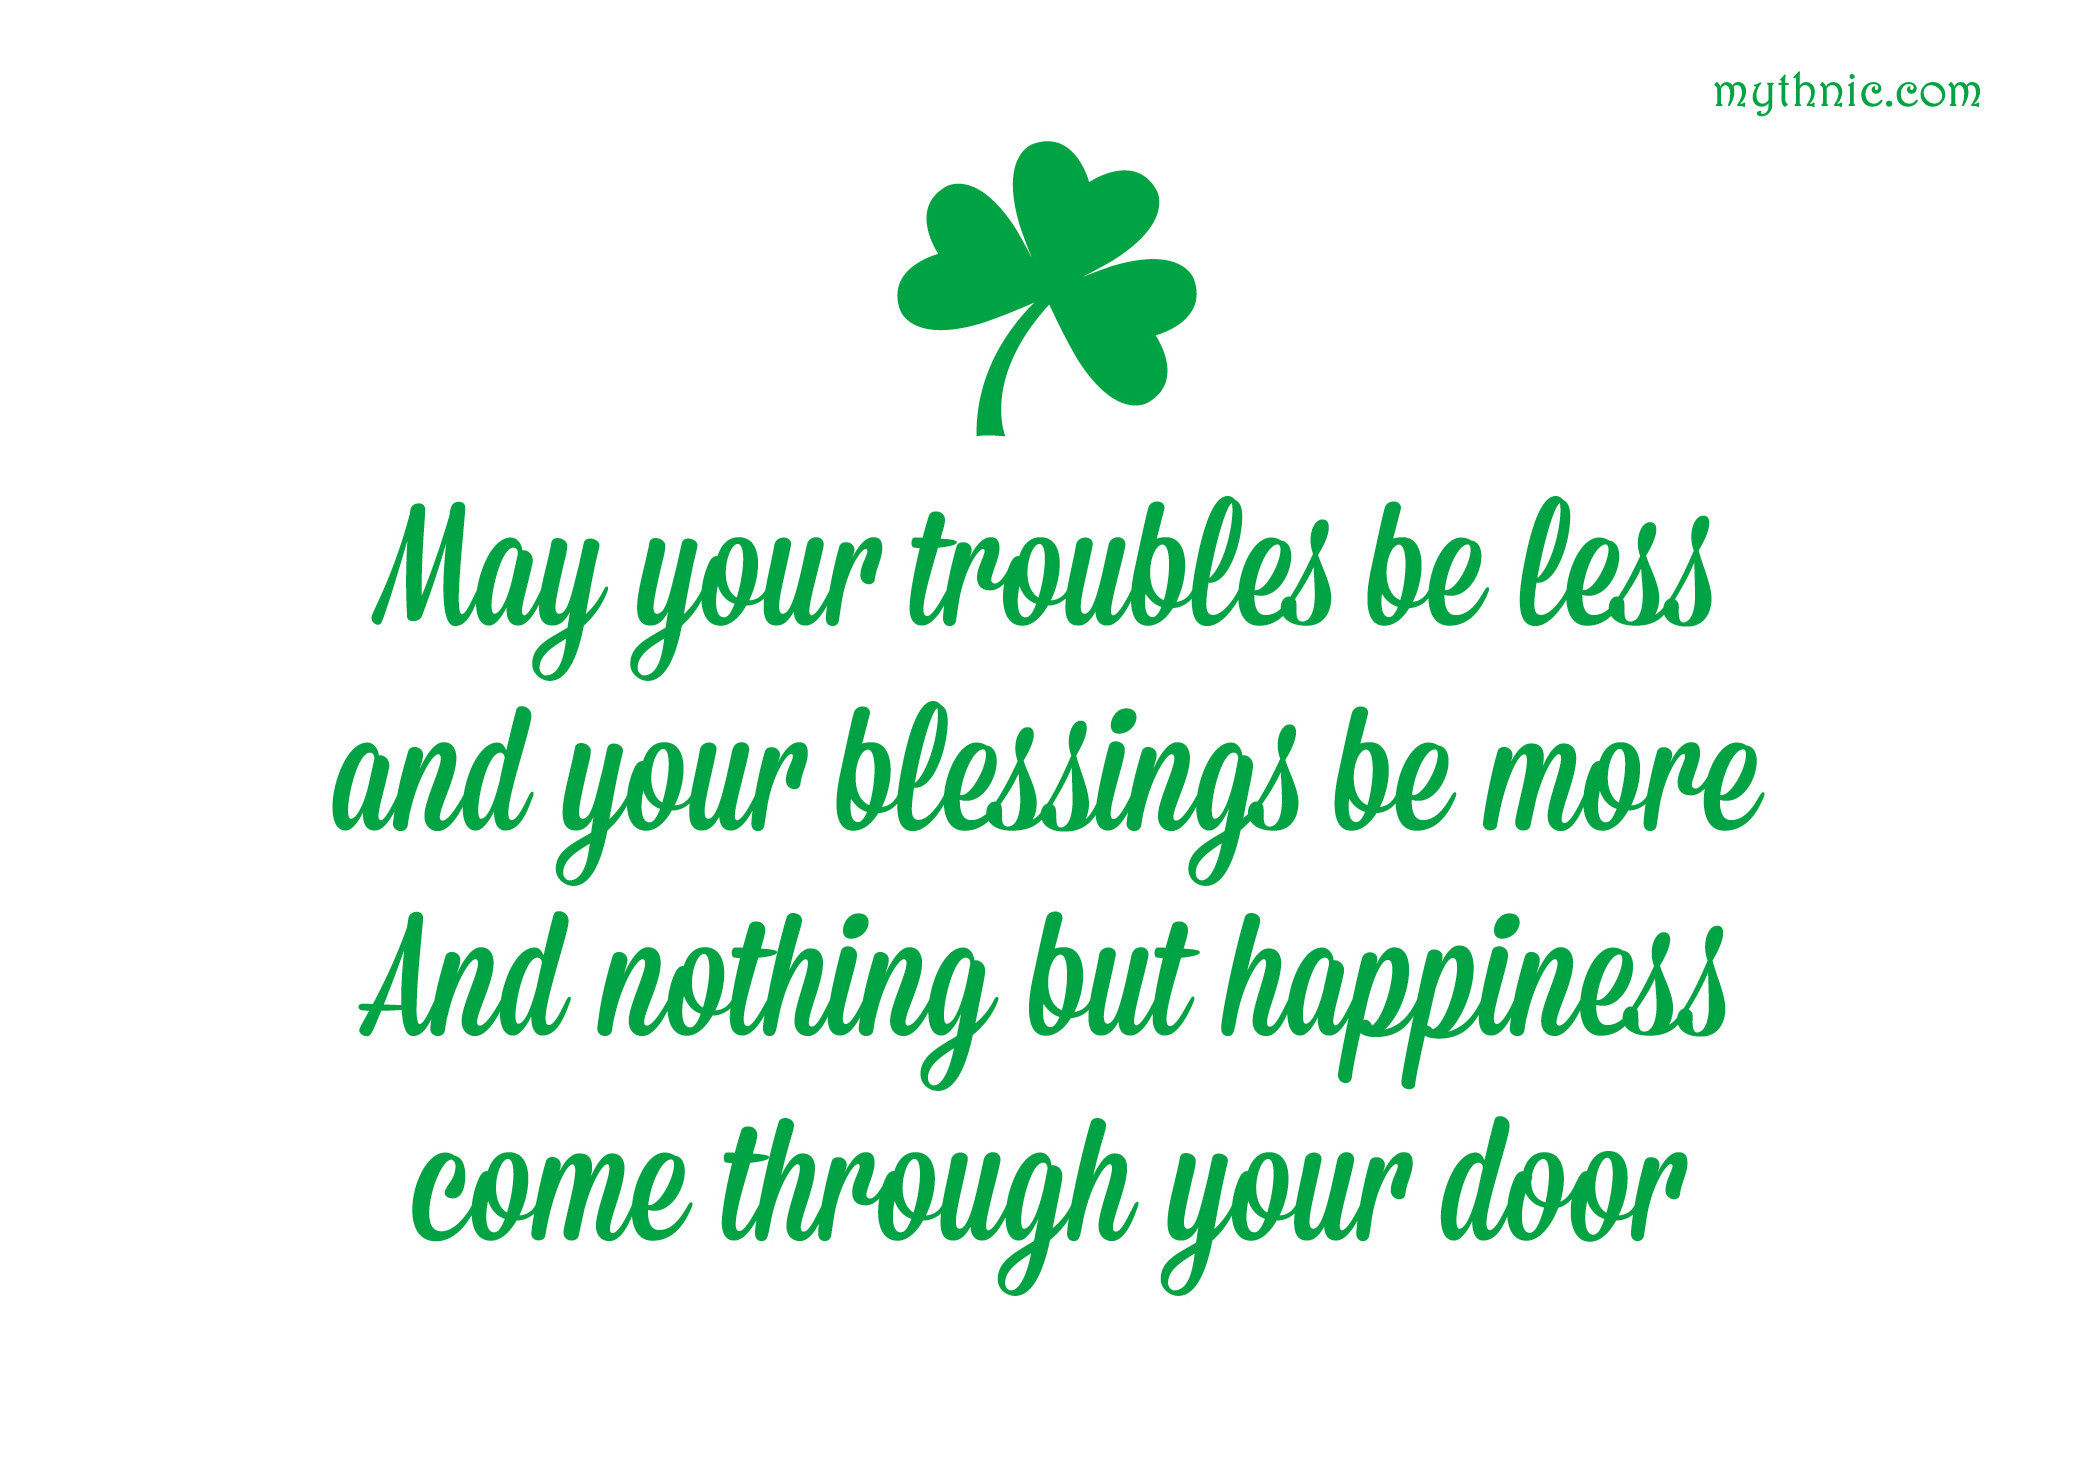 St Patrick's Day Greetings Quotes
 Happy St Patrick’s Day